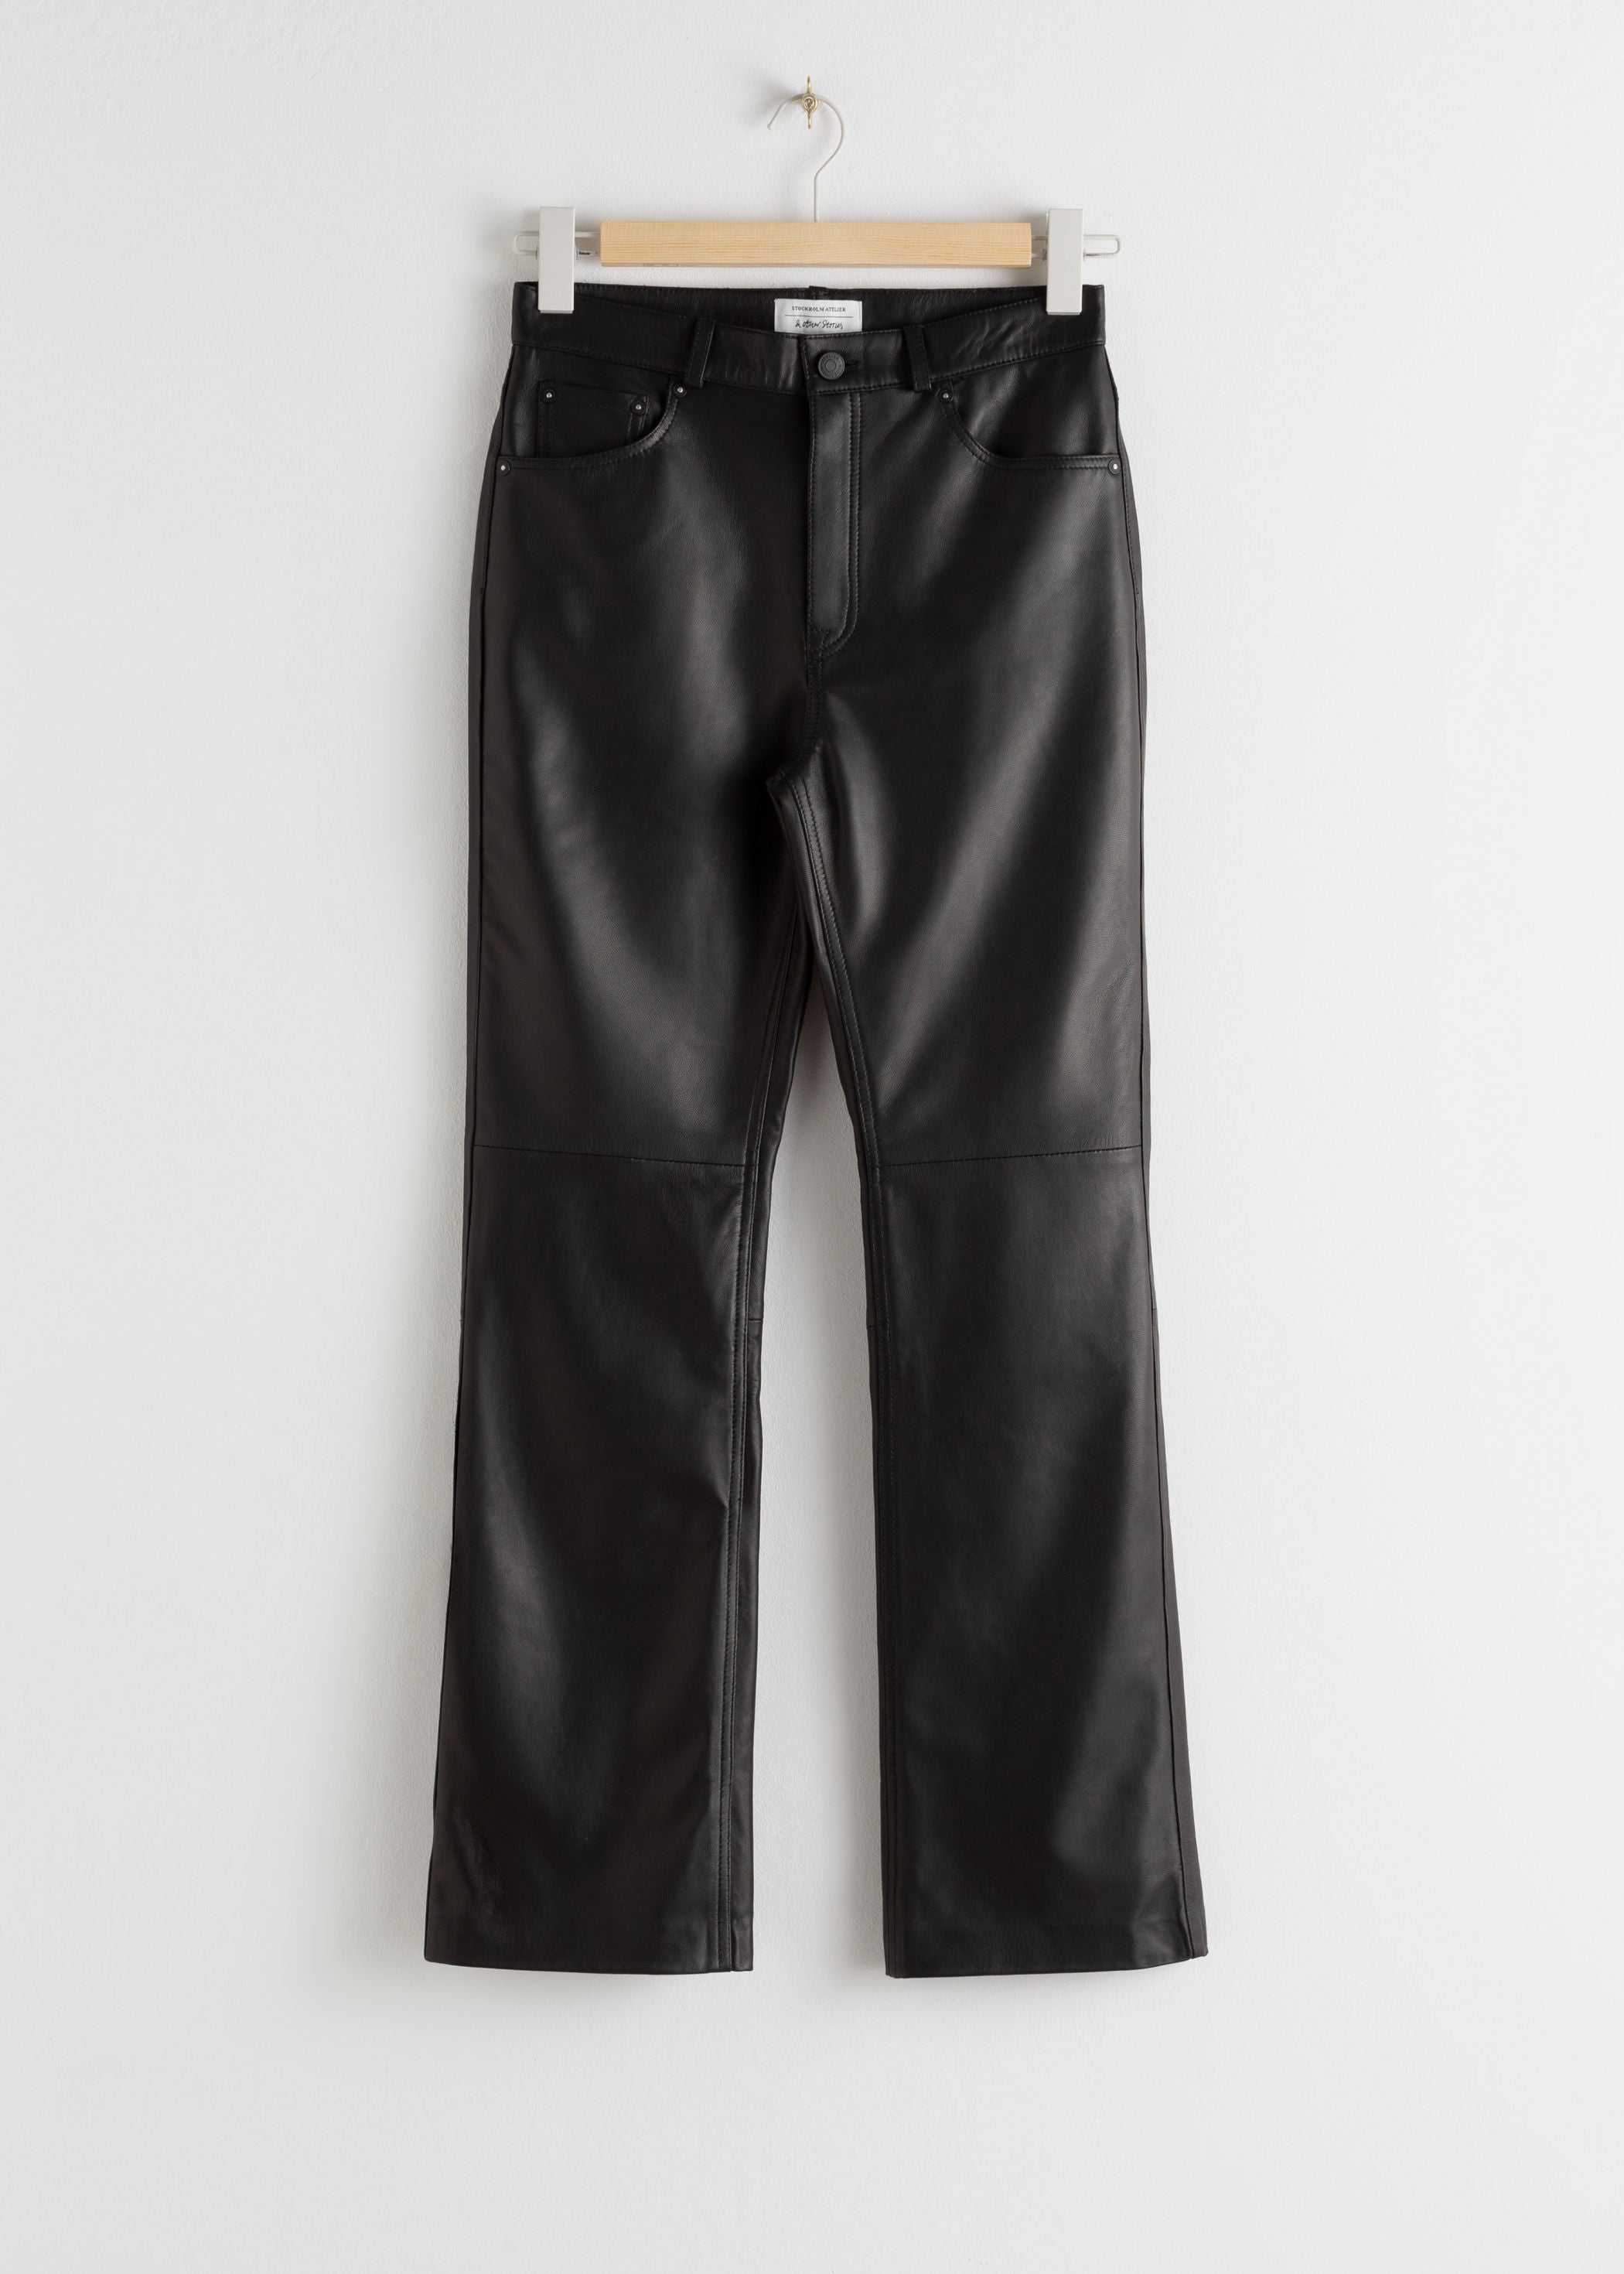 pants that look like leather